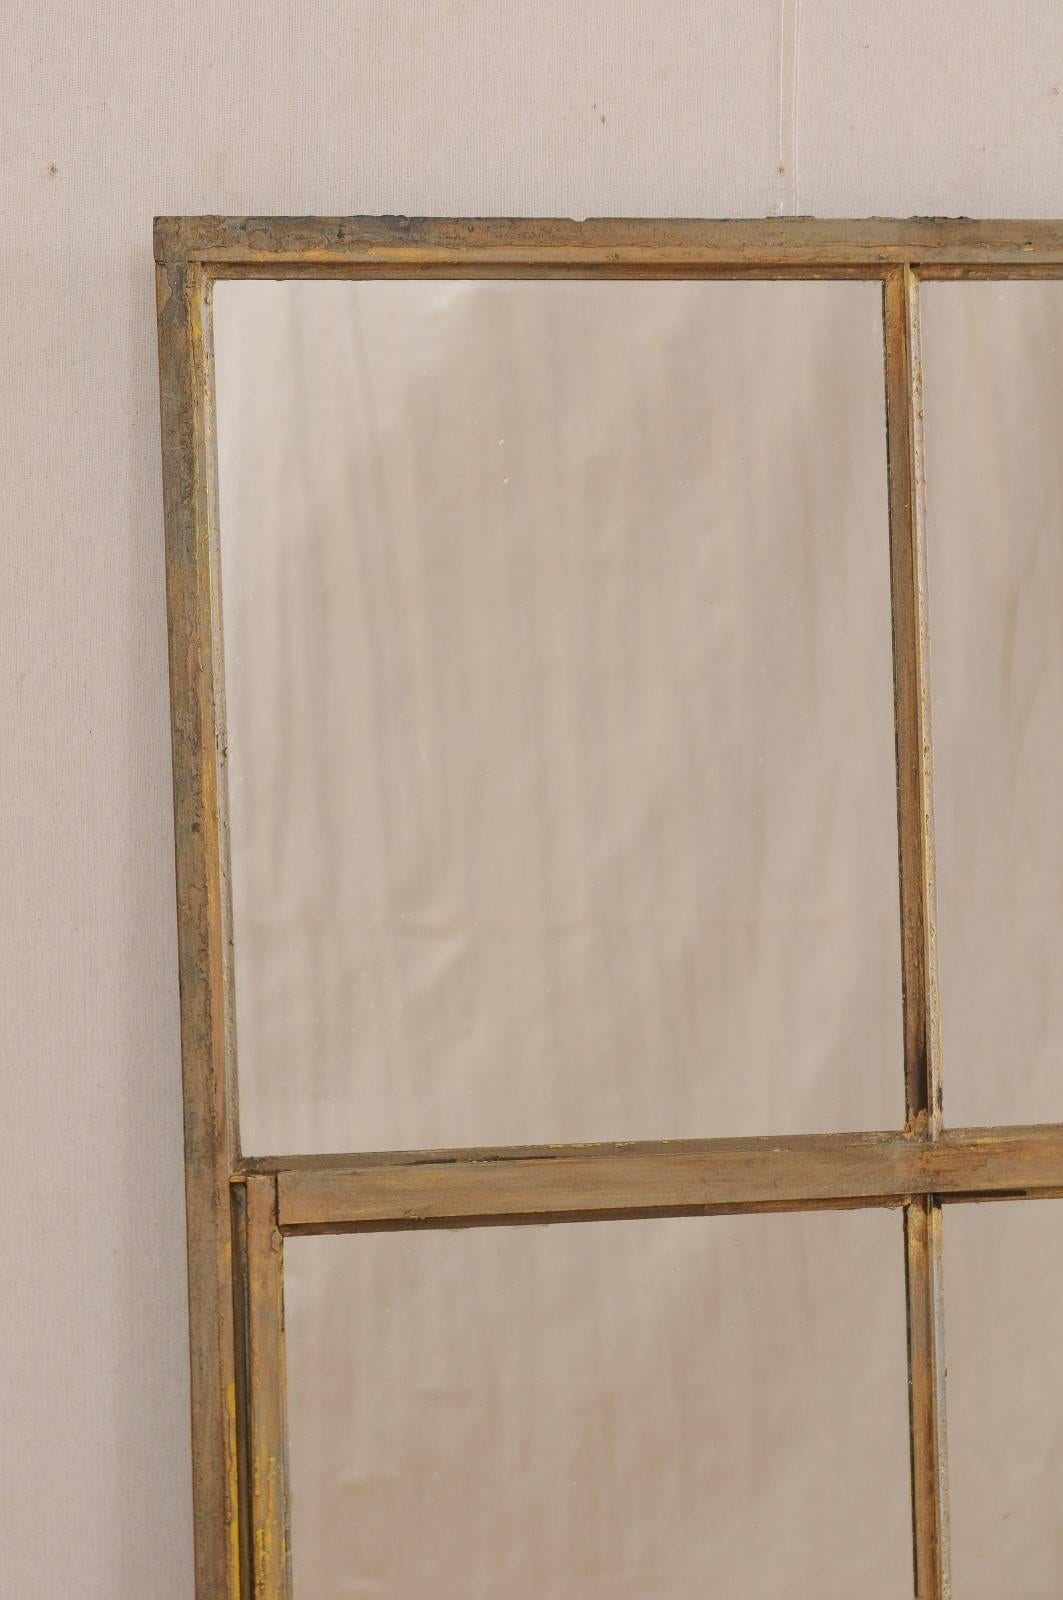 A French early 20th century paneled metal mirror. This antique French mirror features a large sized painted iron frame of nine panels. The iron frame retains it's original paint finish, primarily in a gold hue with nice patina. This French